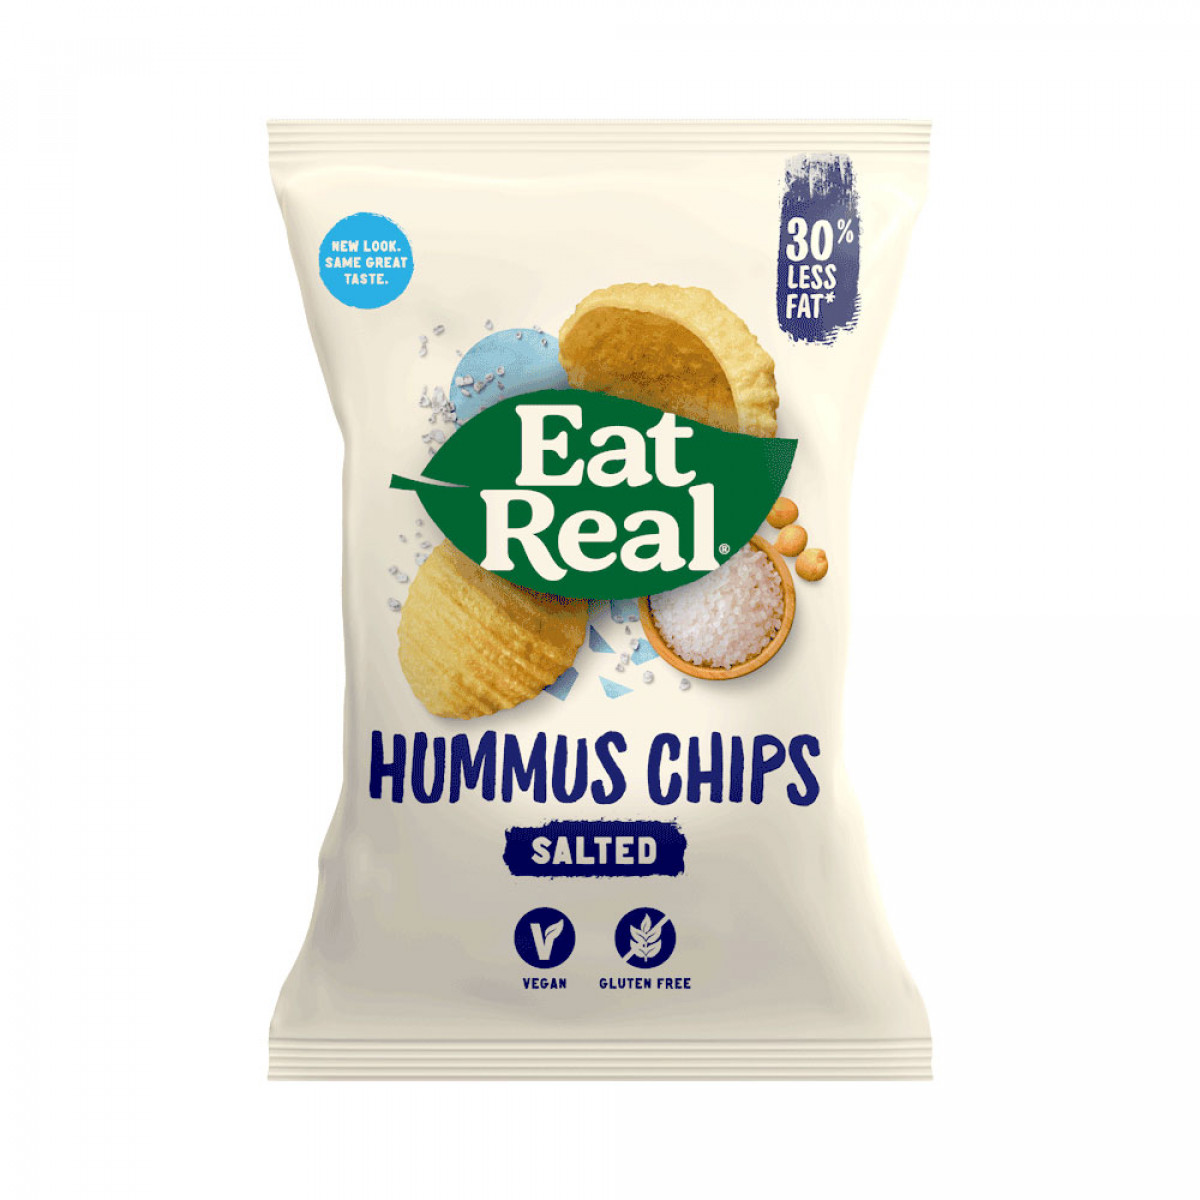 Product picture for Hummus Chips Sea Salt